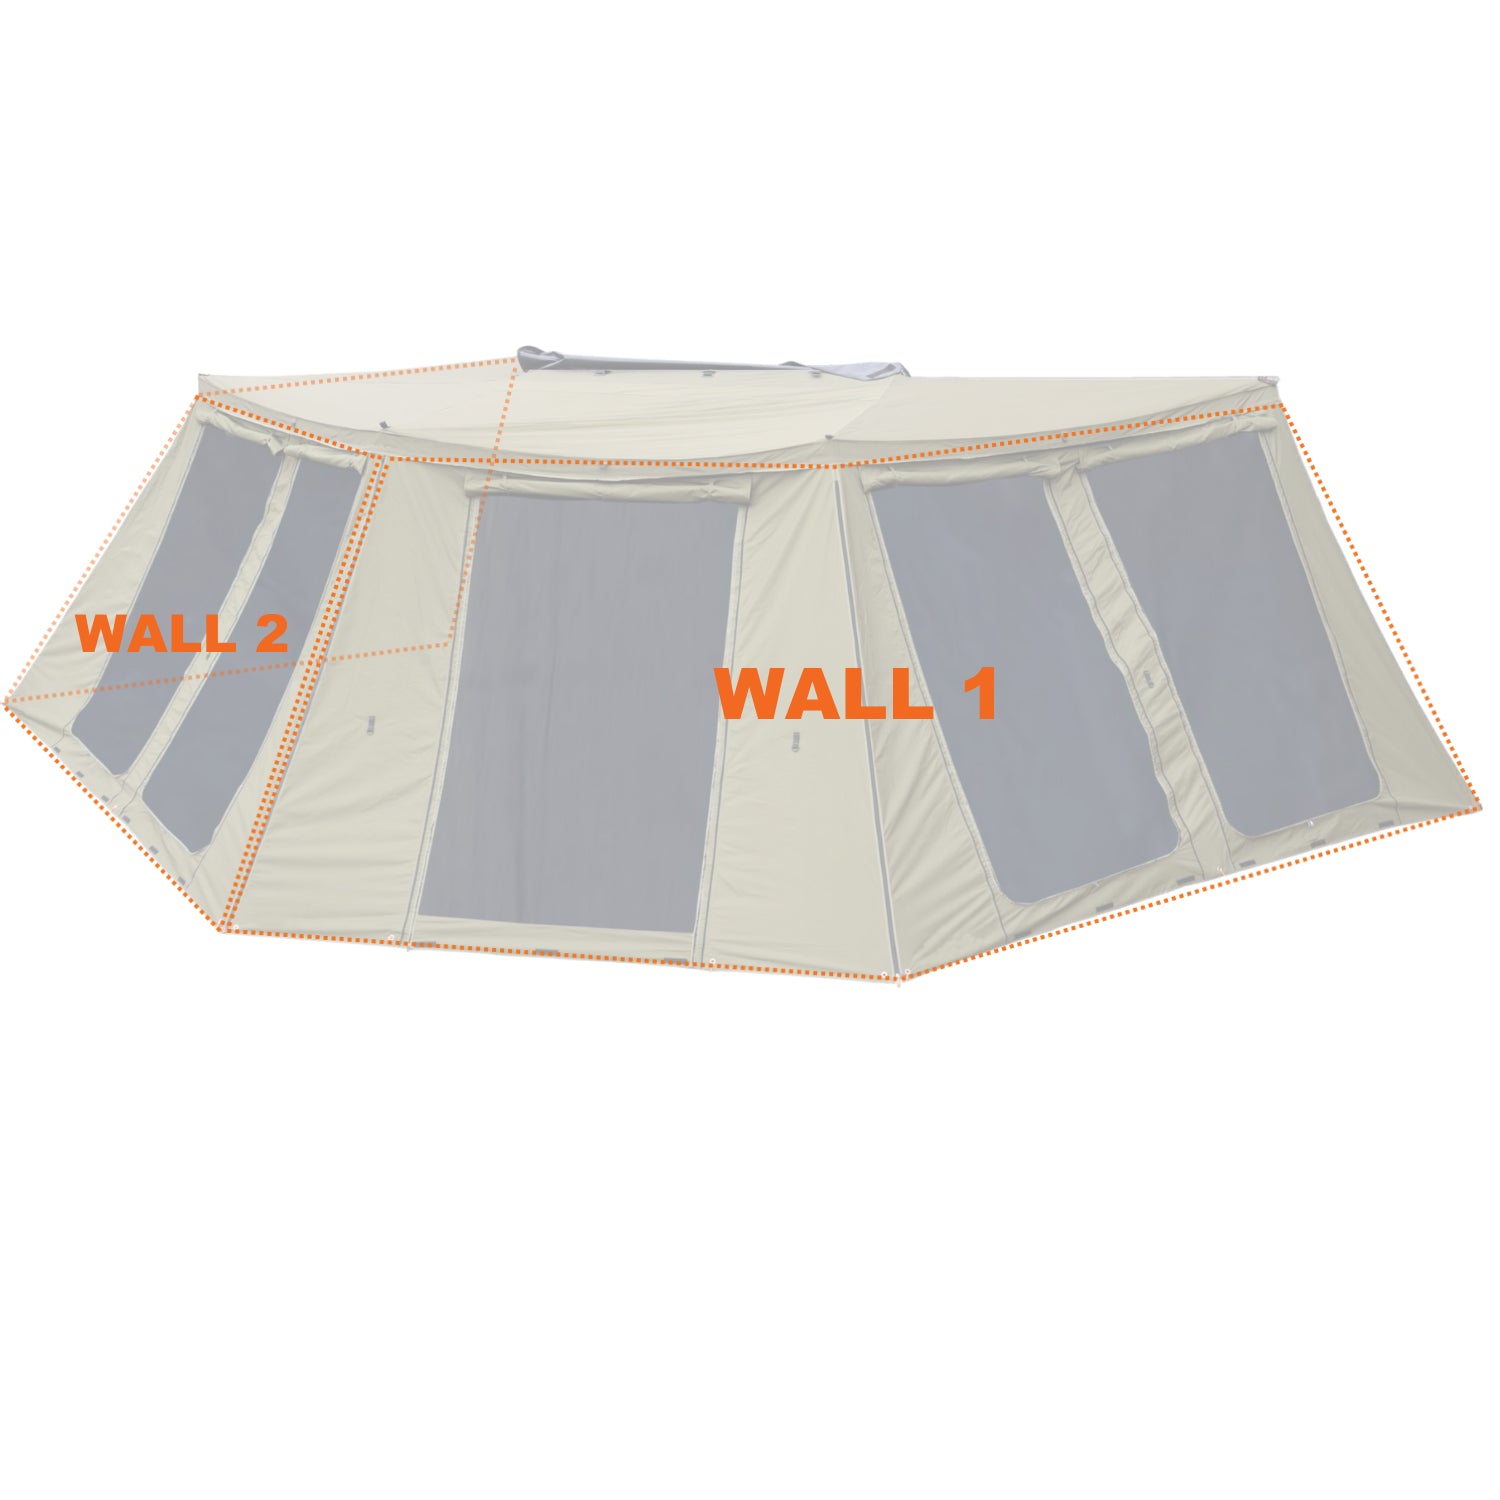 23zero-peregrine-deluxe-2-0-270-degree-right-awning-wall-1-with-screen